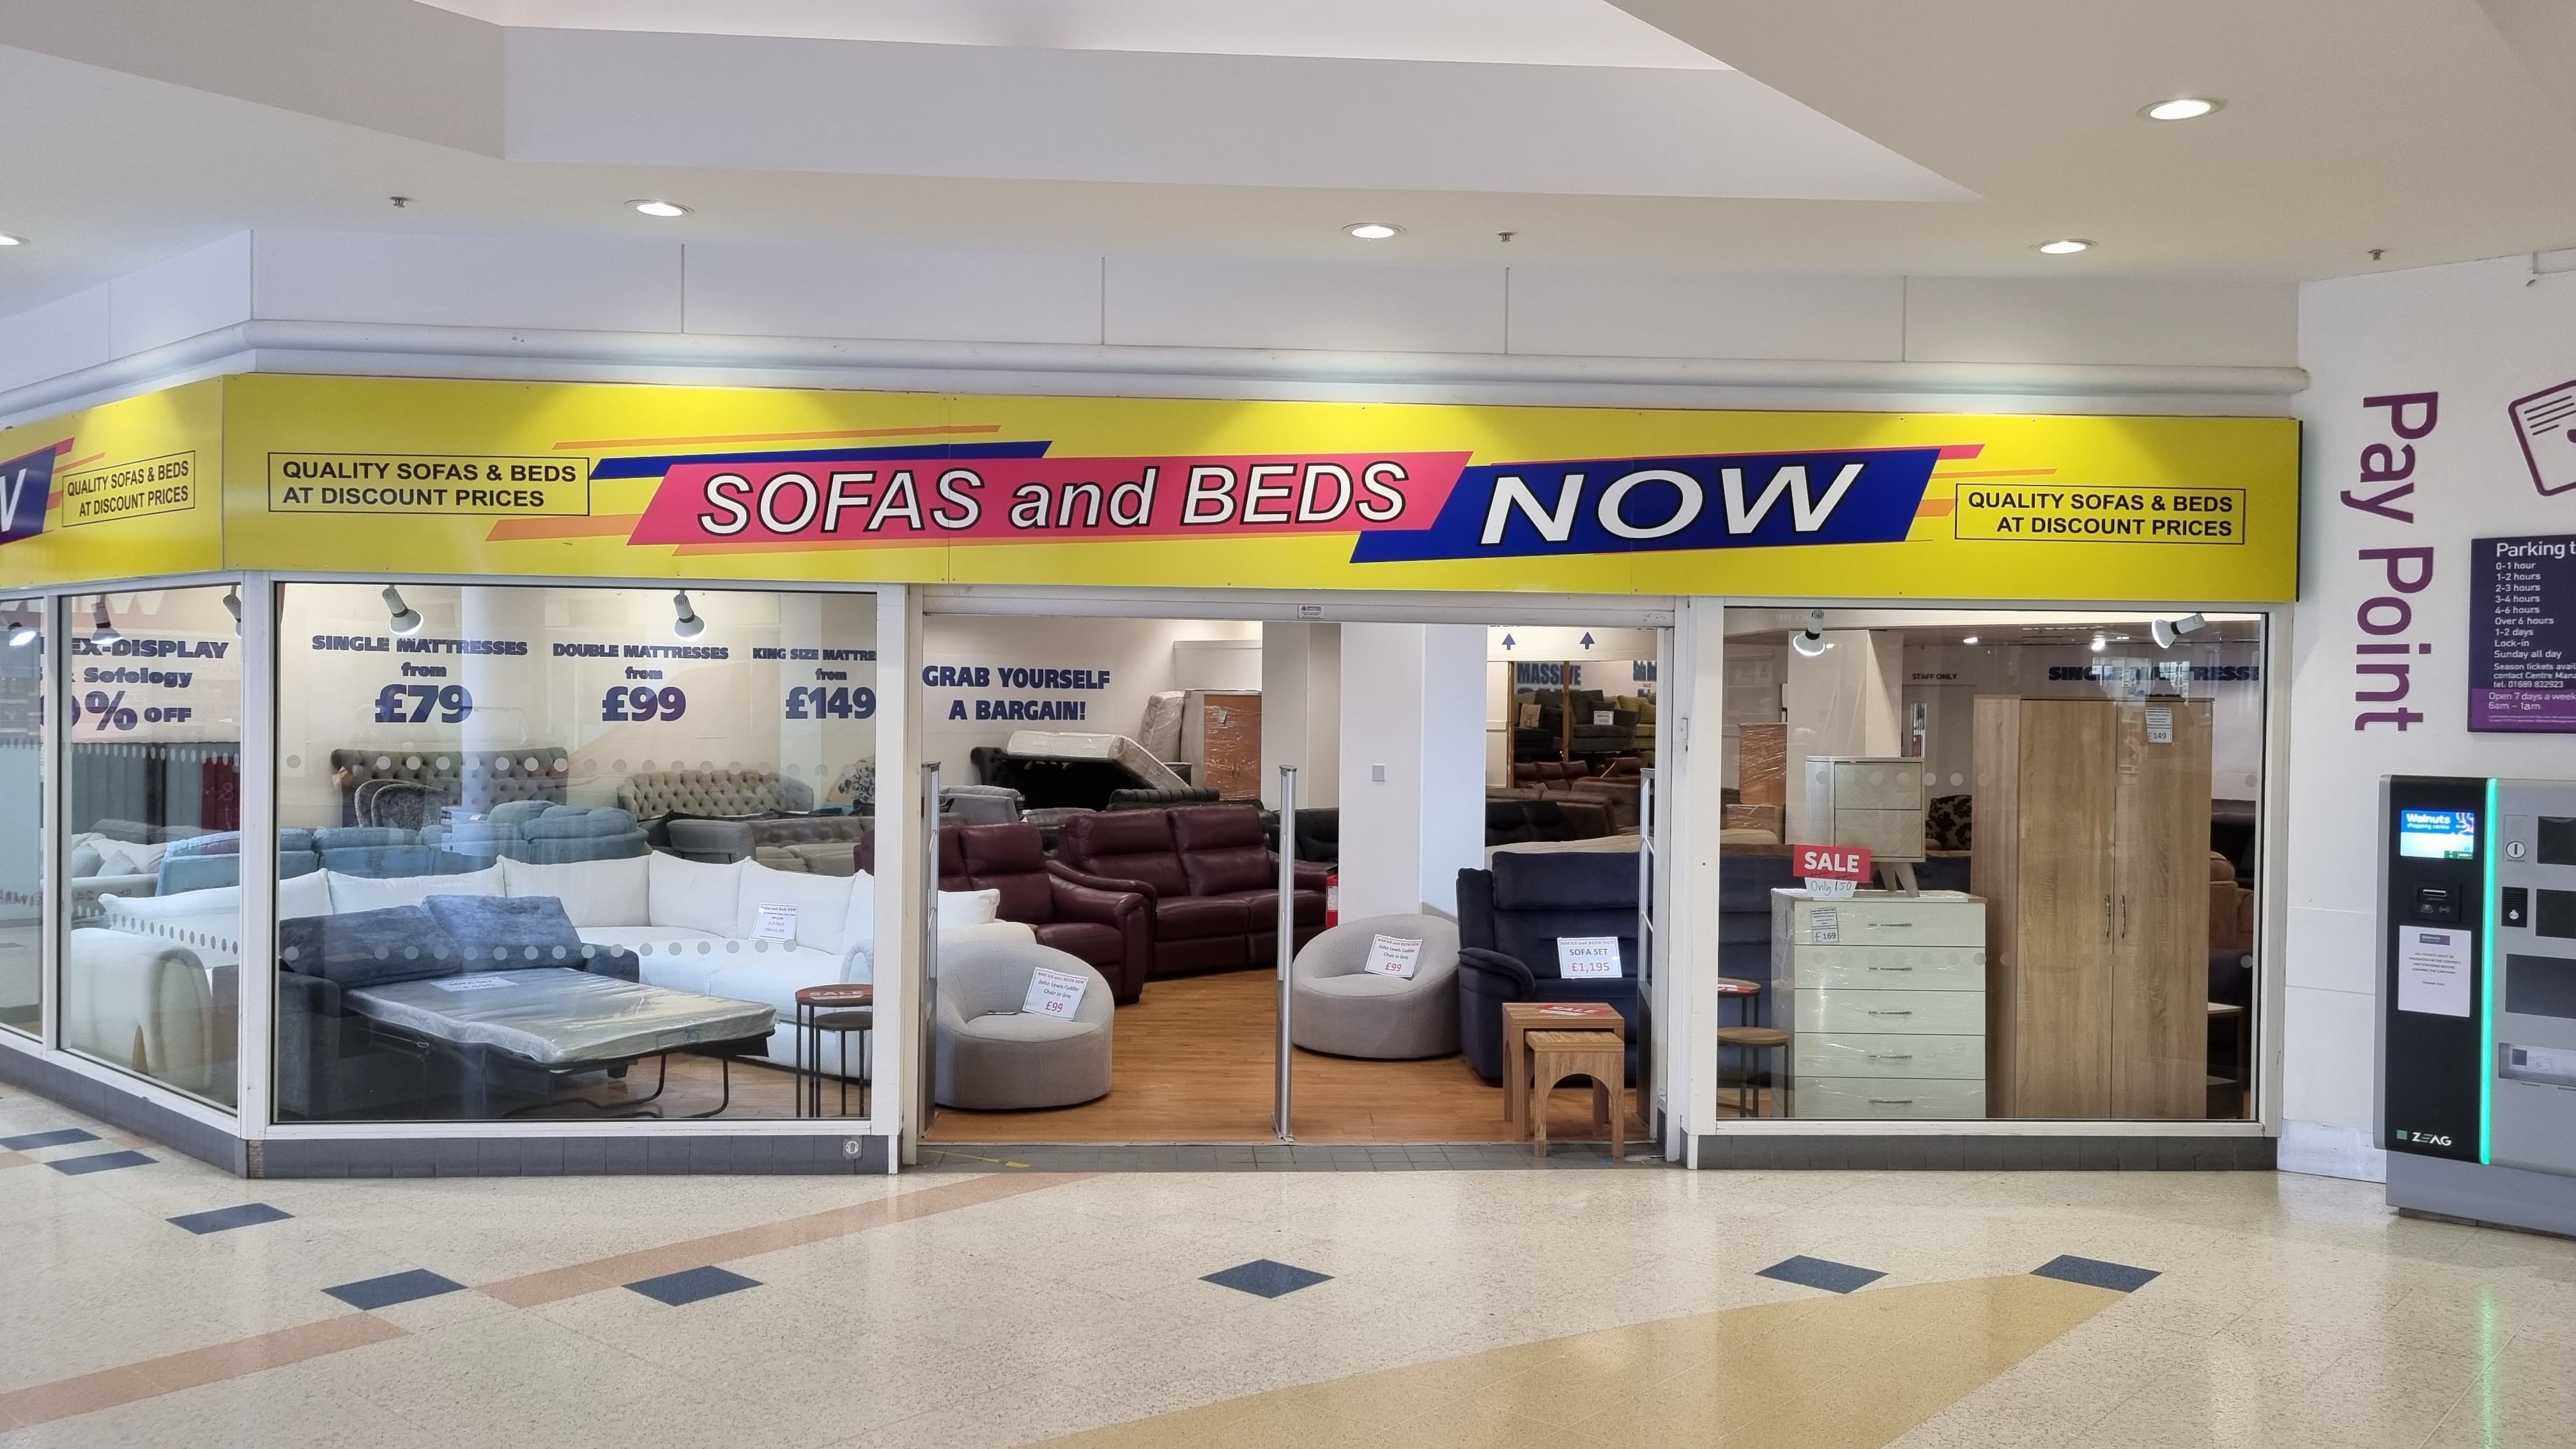 Sofas & Beds Now